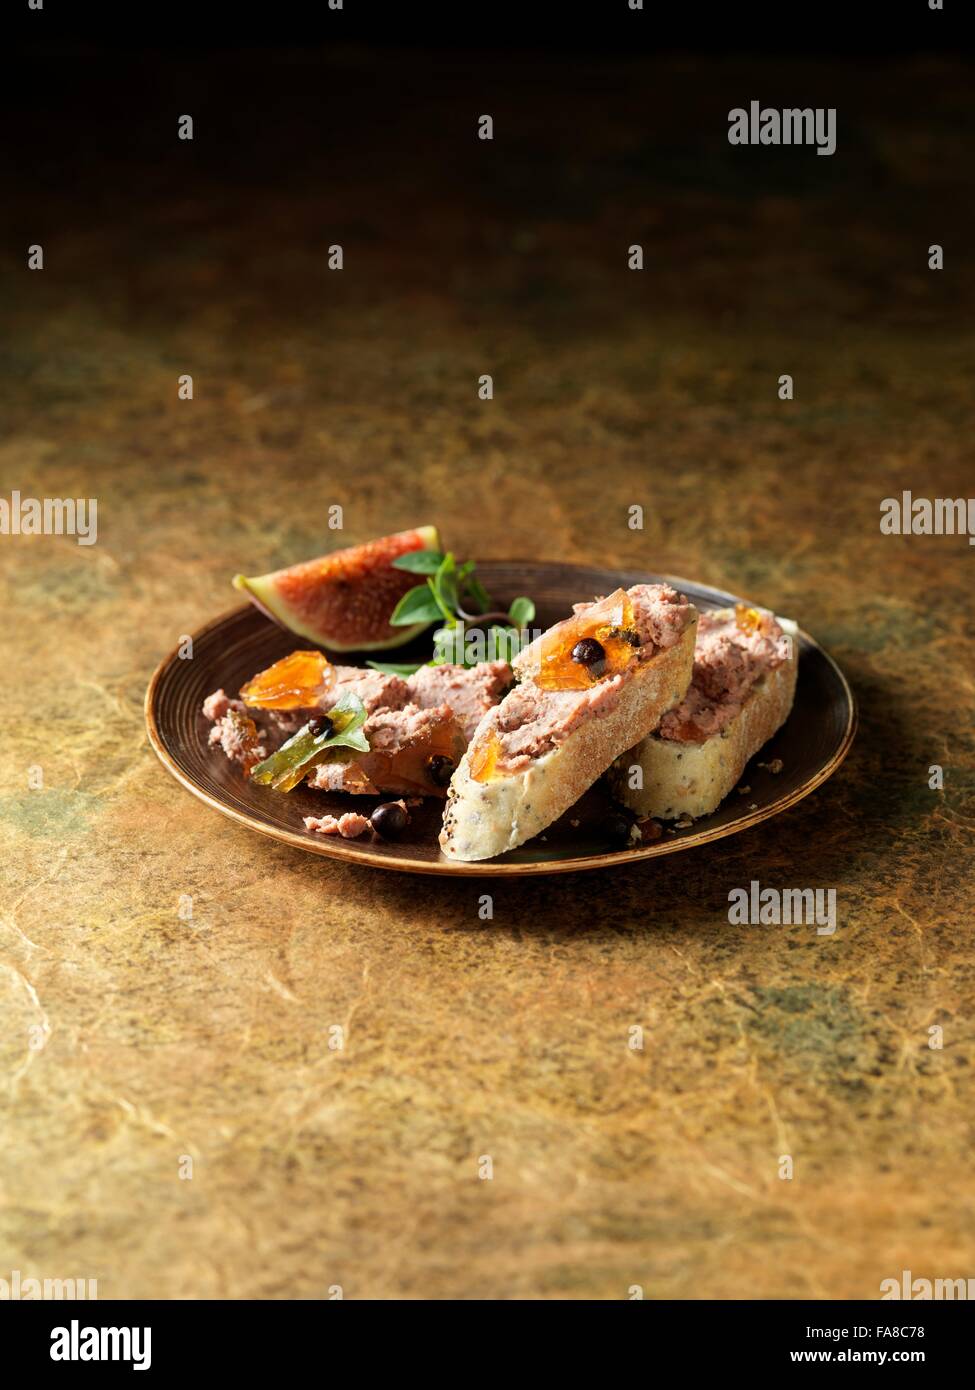 Plate of venison pate with irish whisky on bread with figs Stock Photo